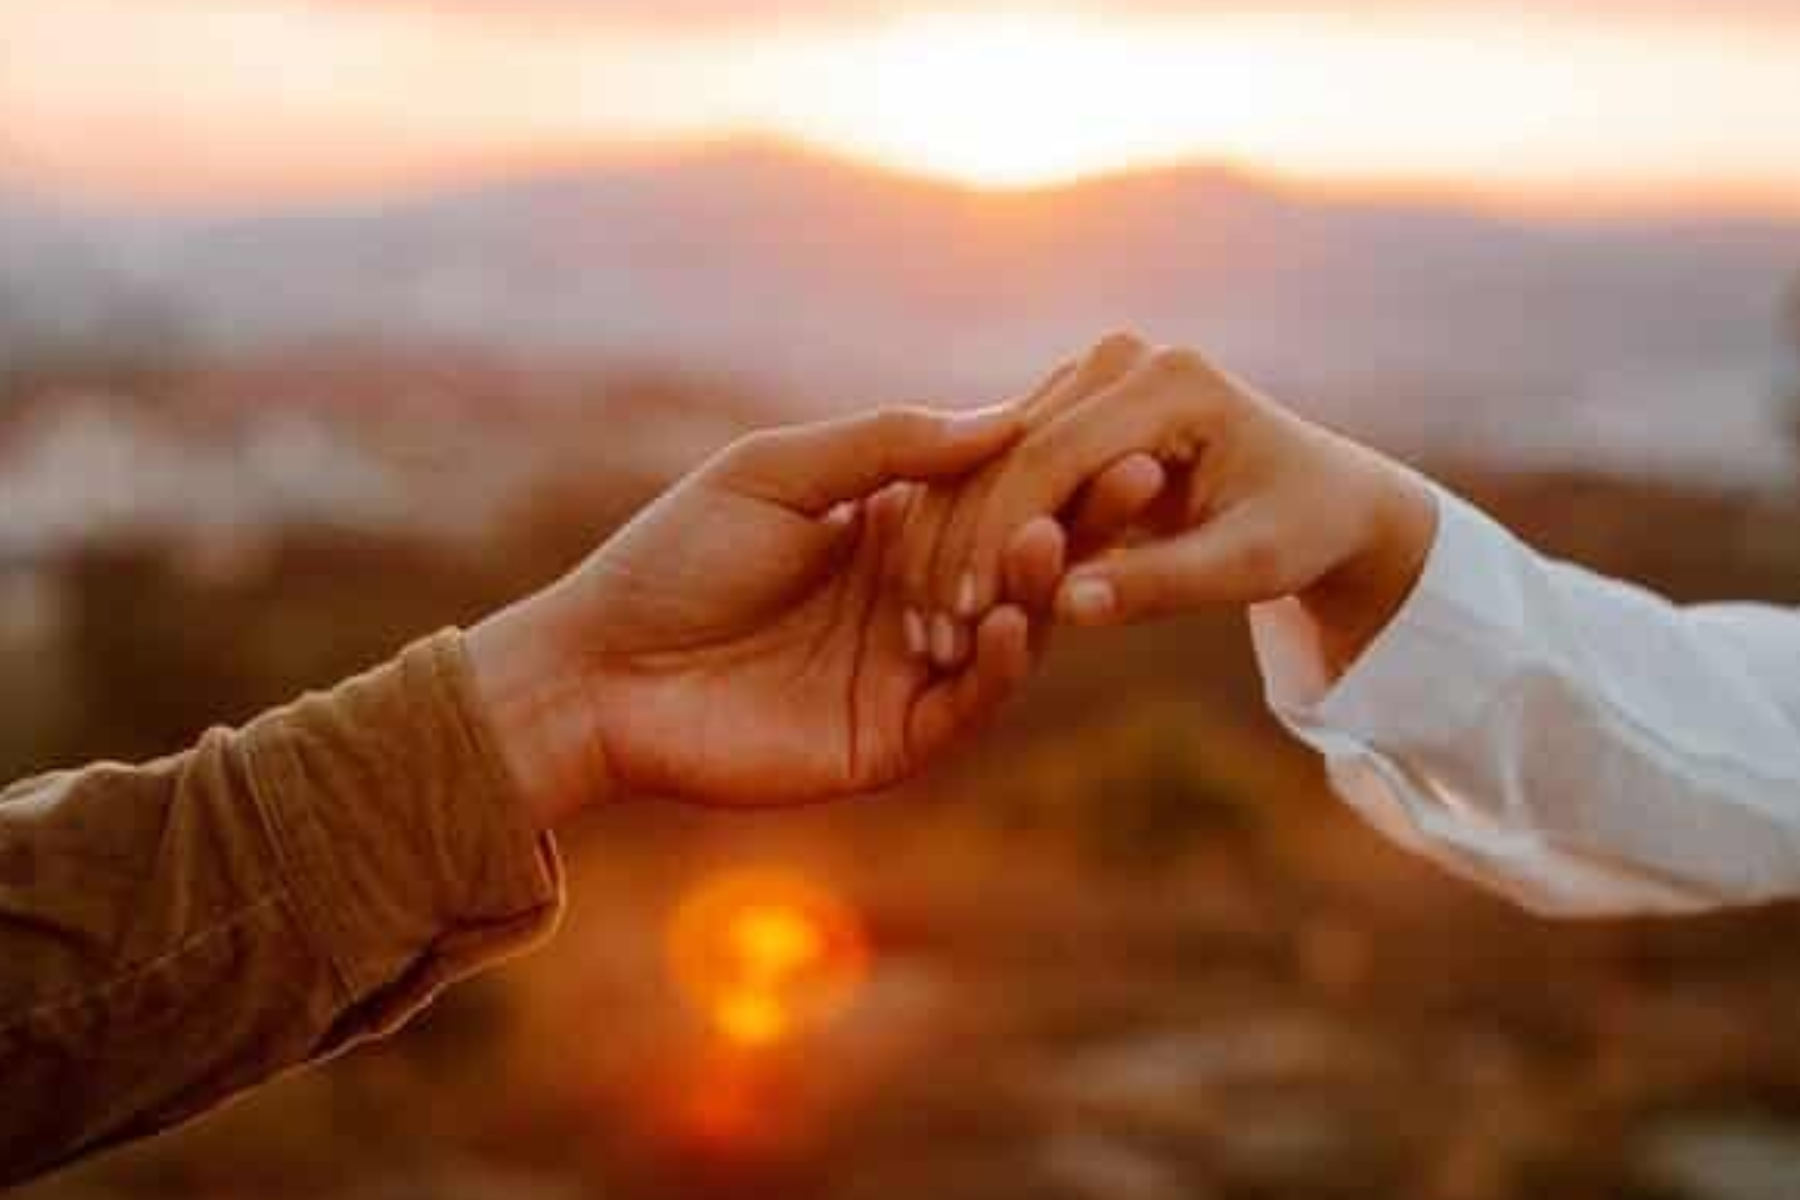 A man and a woman hold hands in front of the sunset